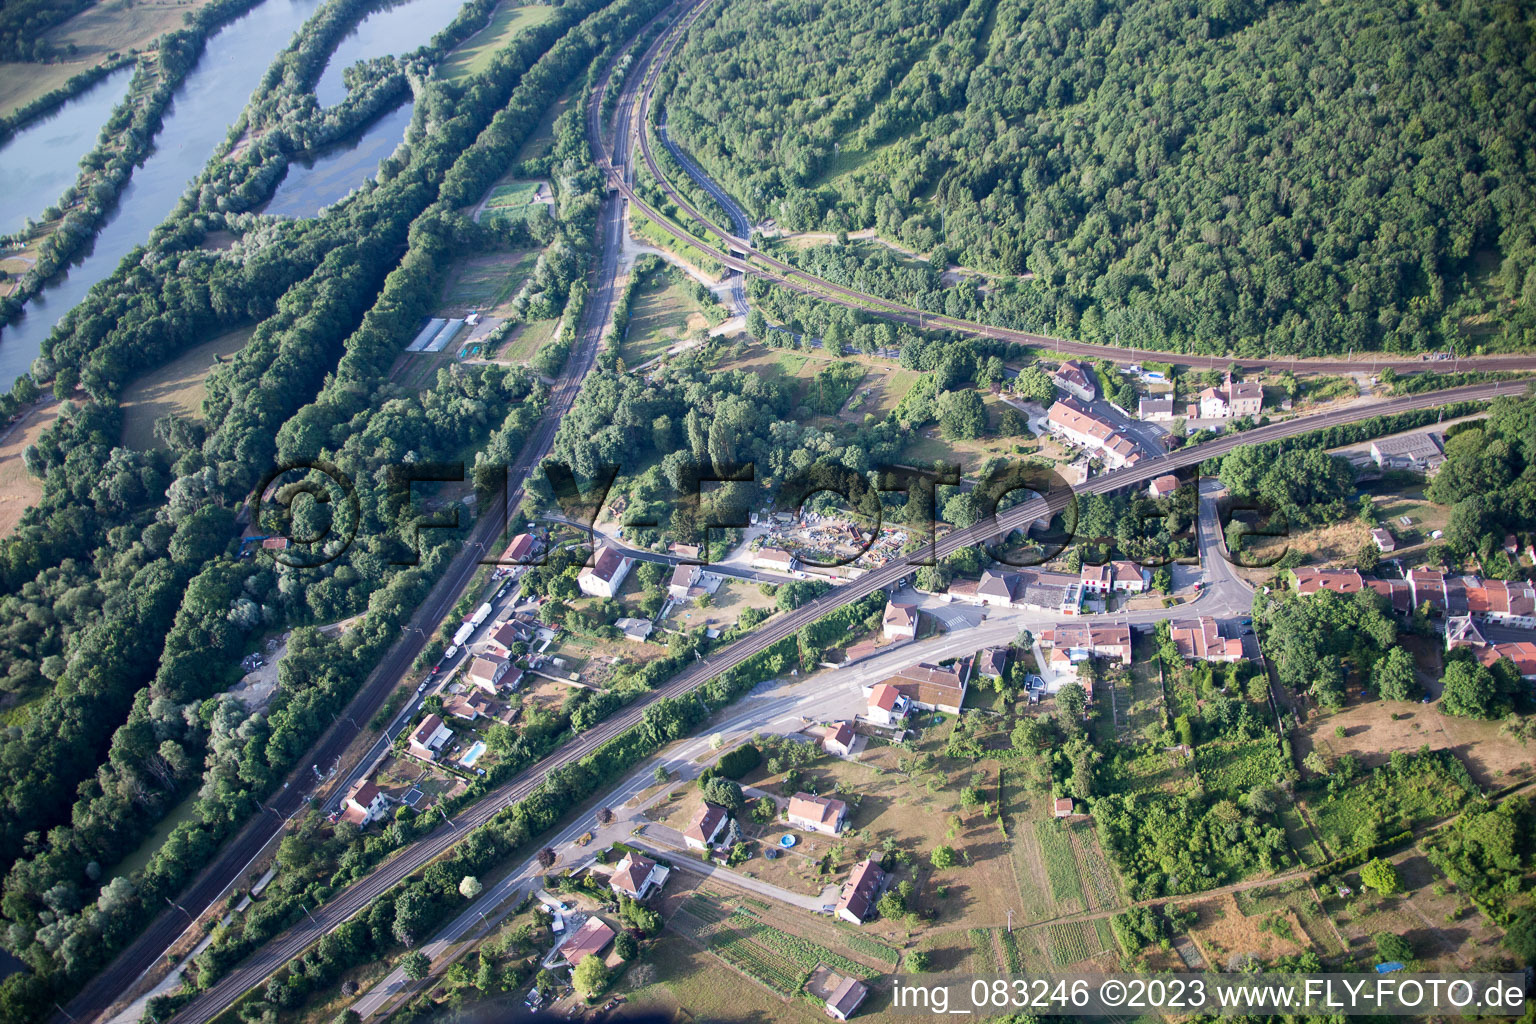 Arnaville in the state Meurthe et Moselle, France from above